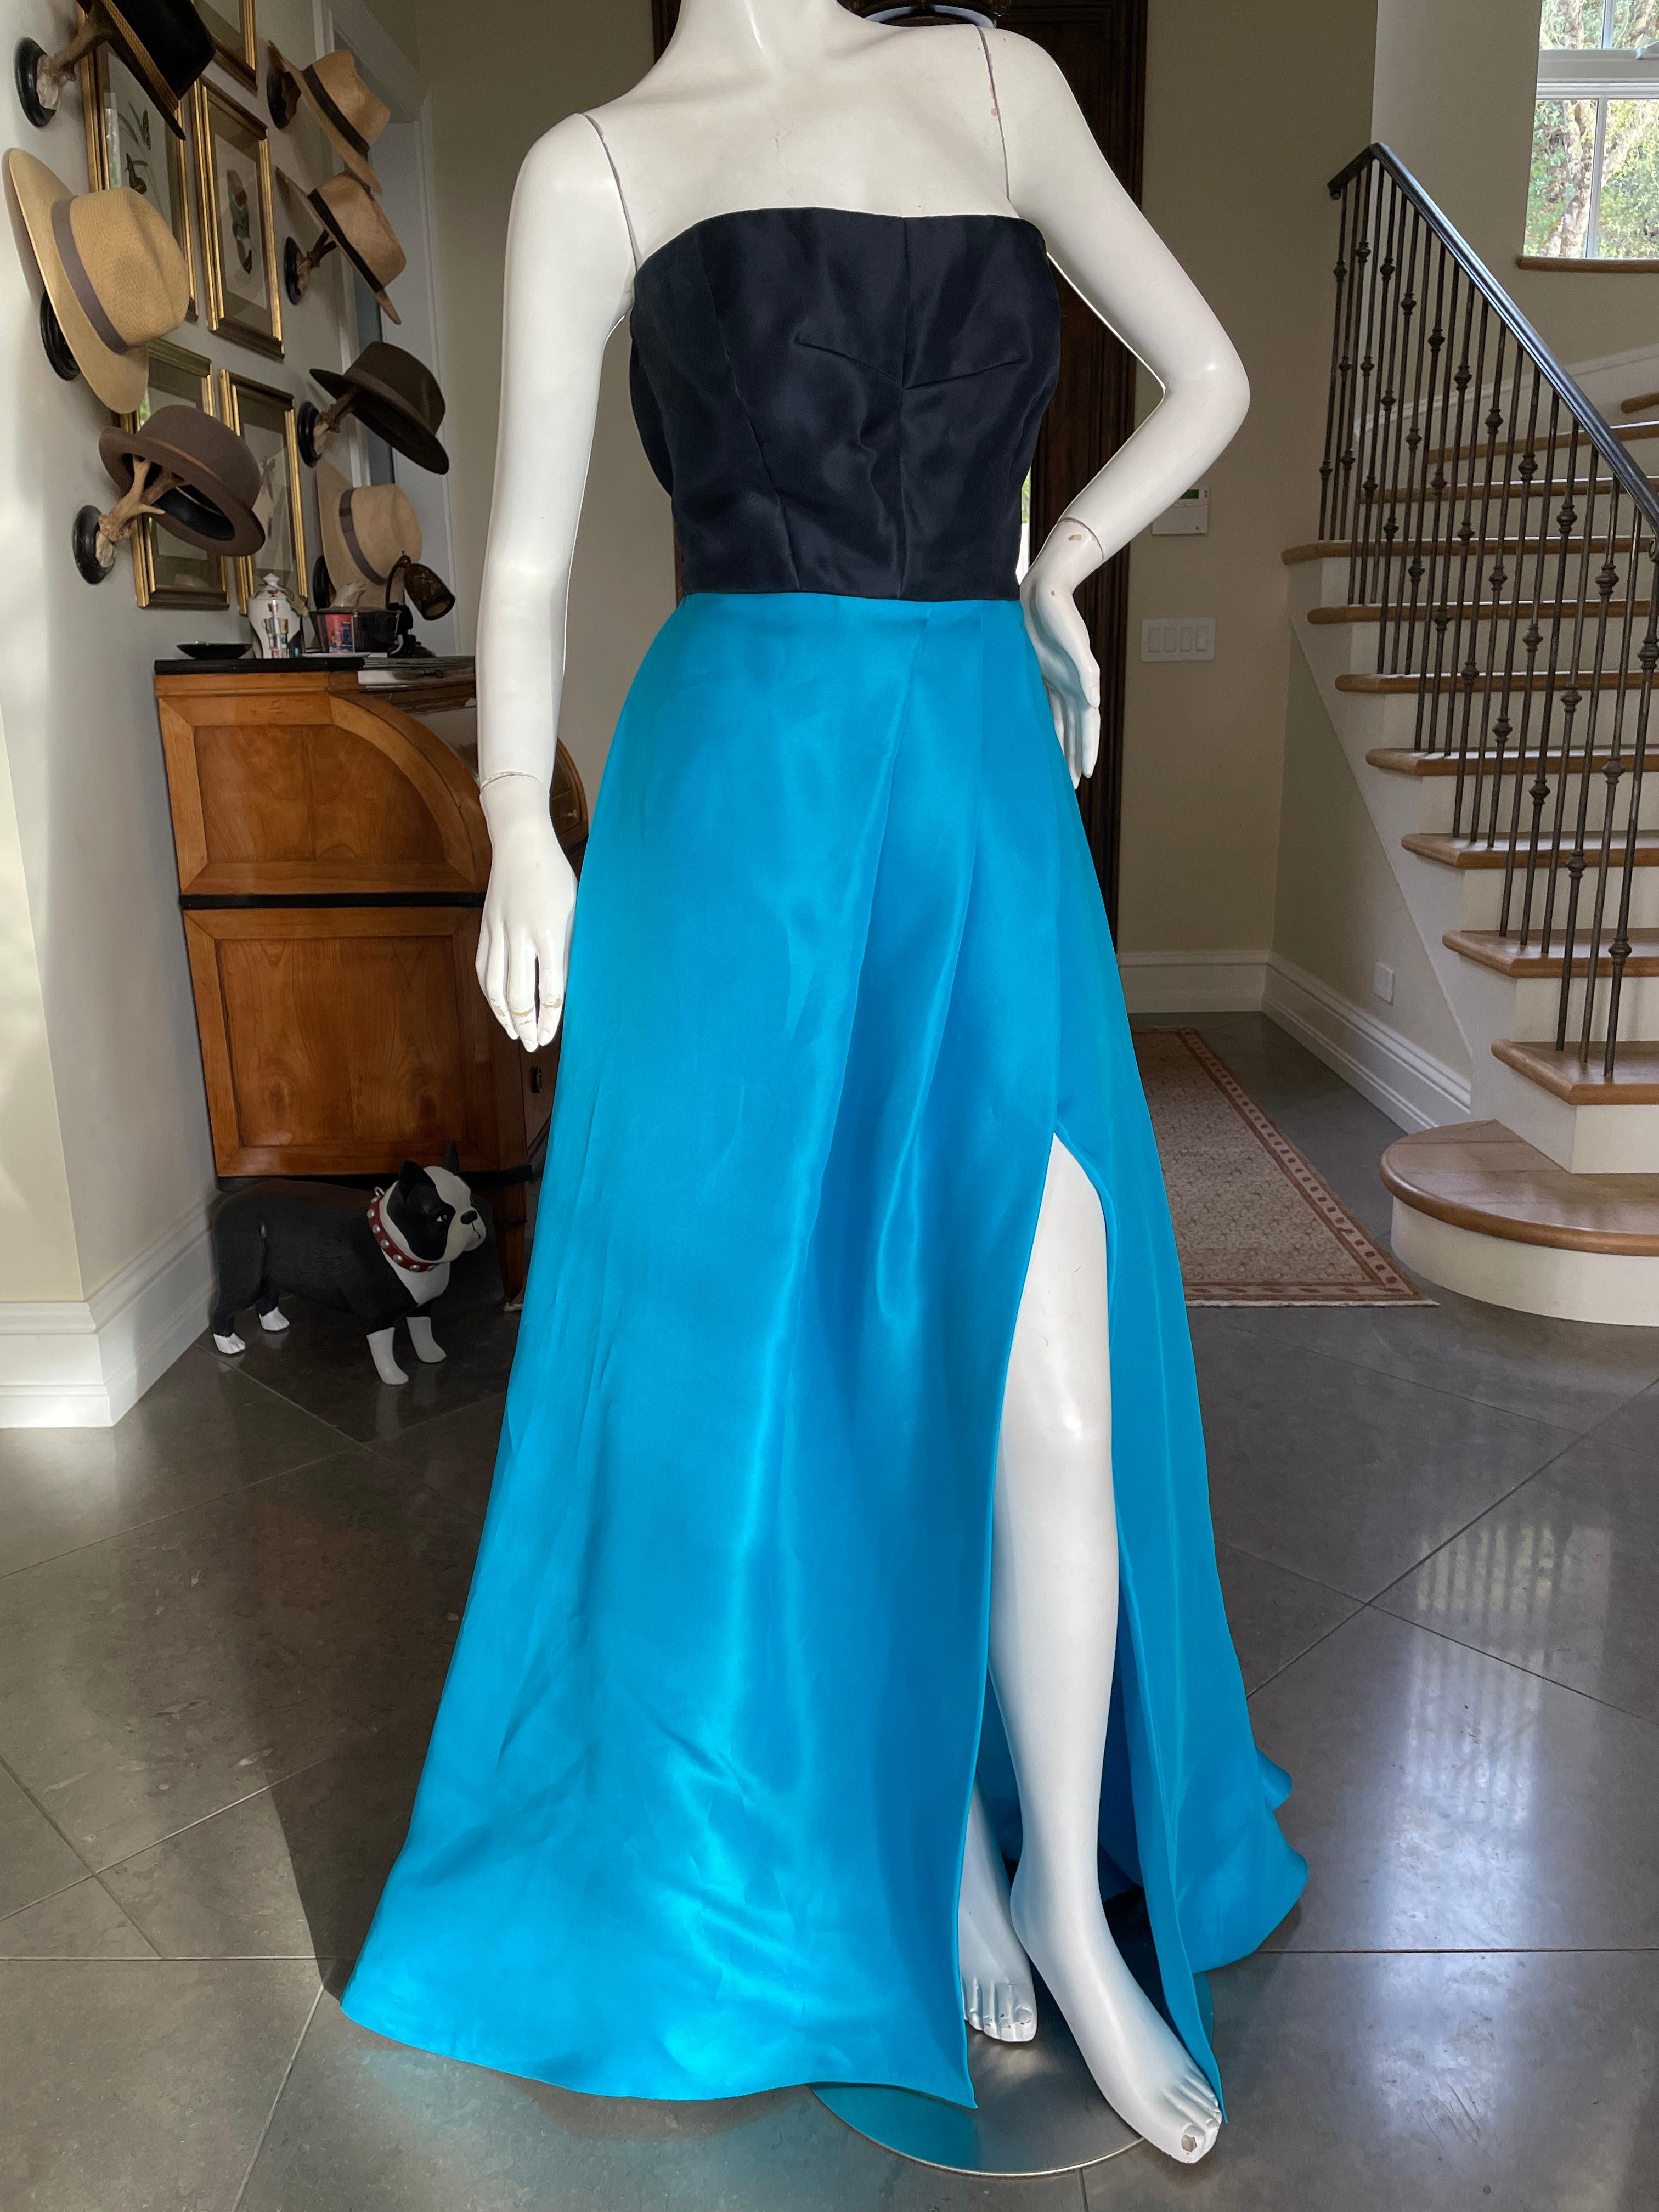 Monique Lhuillier Vintage Strapless Silk Evening Dress
This is so pretty, simple and elegant.
 Size 10 
Bust 36